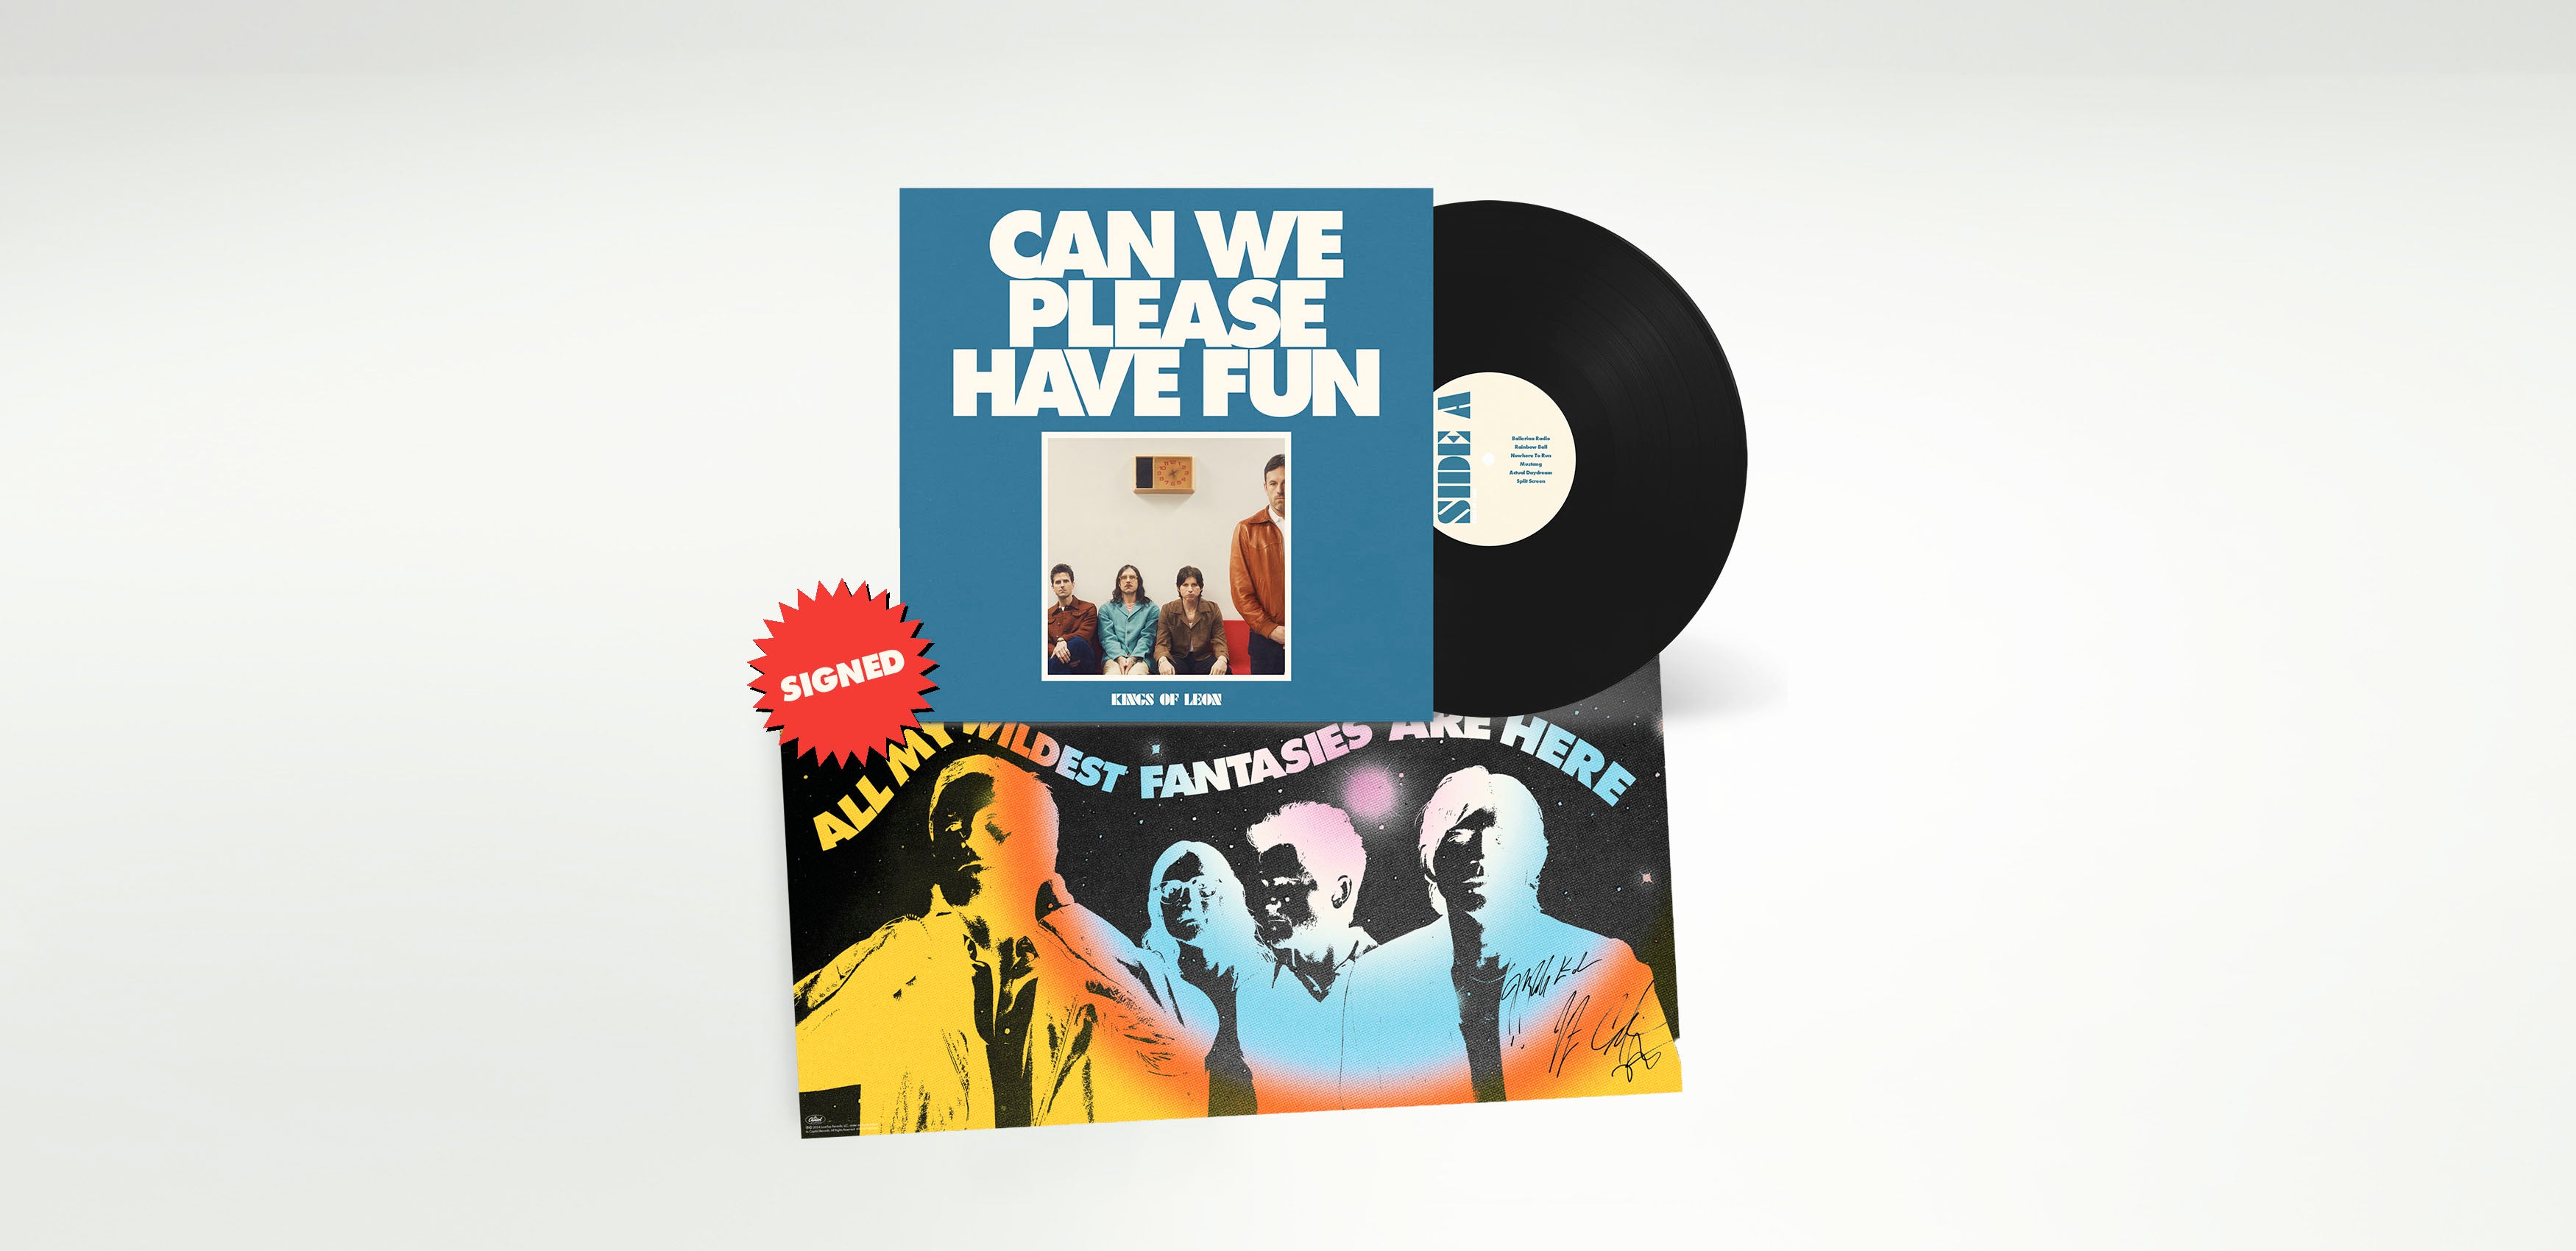 Can We Please Have Fun Limited Edition Signed Vinyl